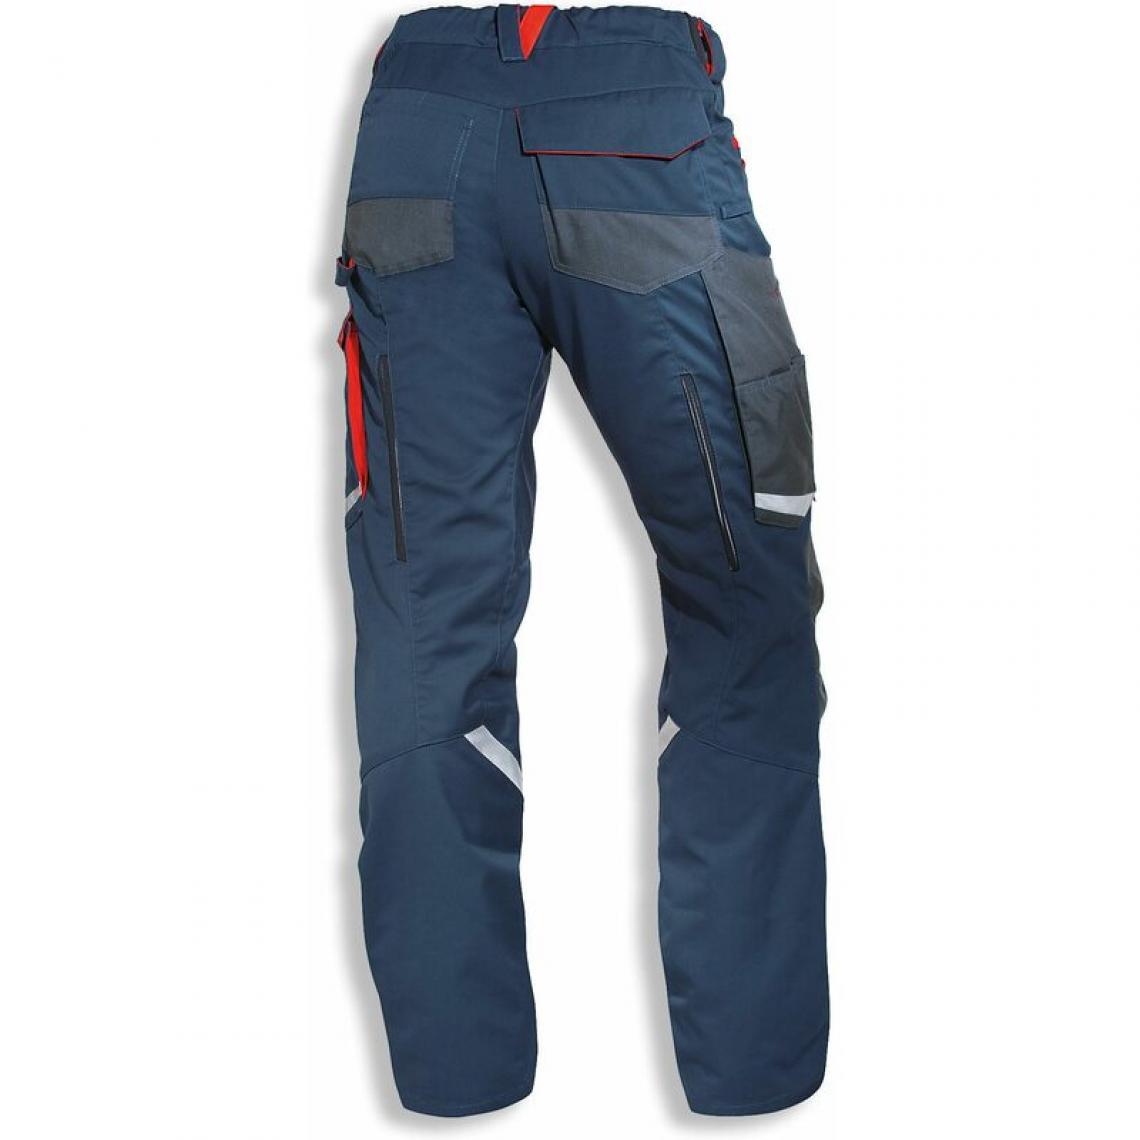 Uvex - uvex Pantalon cargo regular fit suXXeed, bleu nuit,taille 40 () - Protections corps